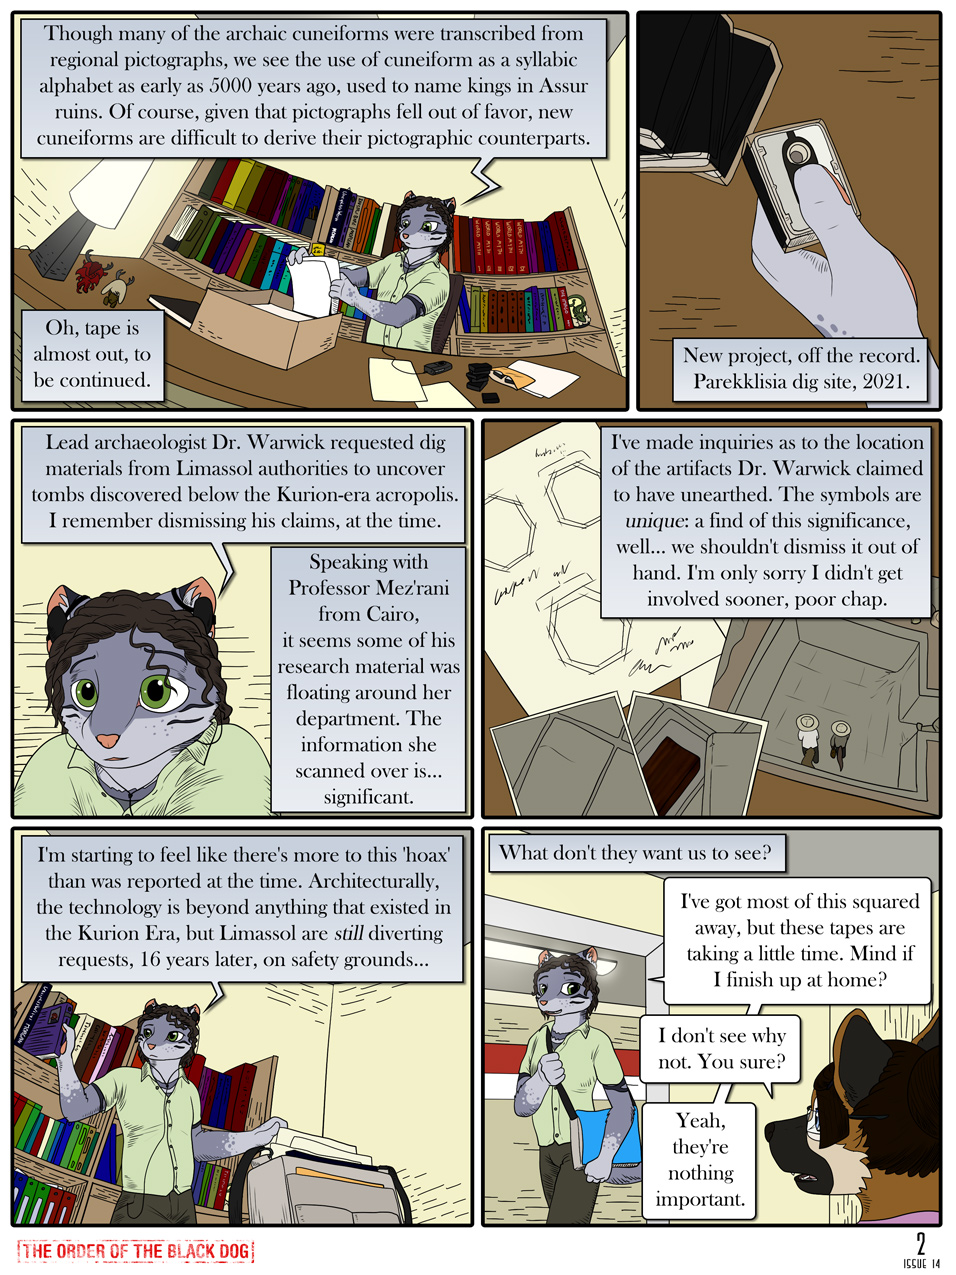 Issue 14, Page 2